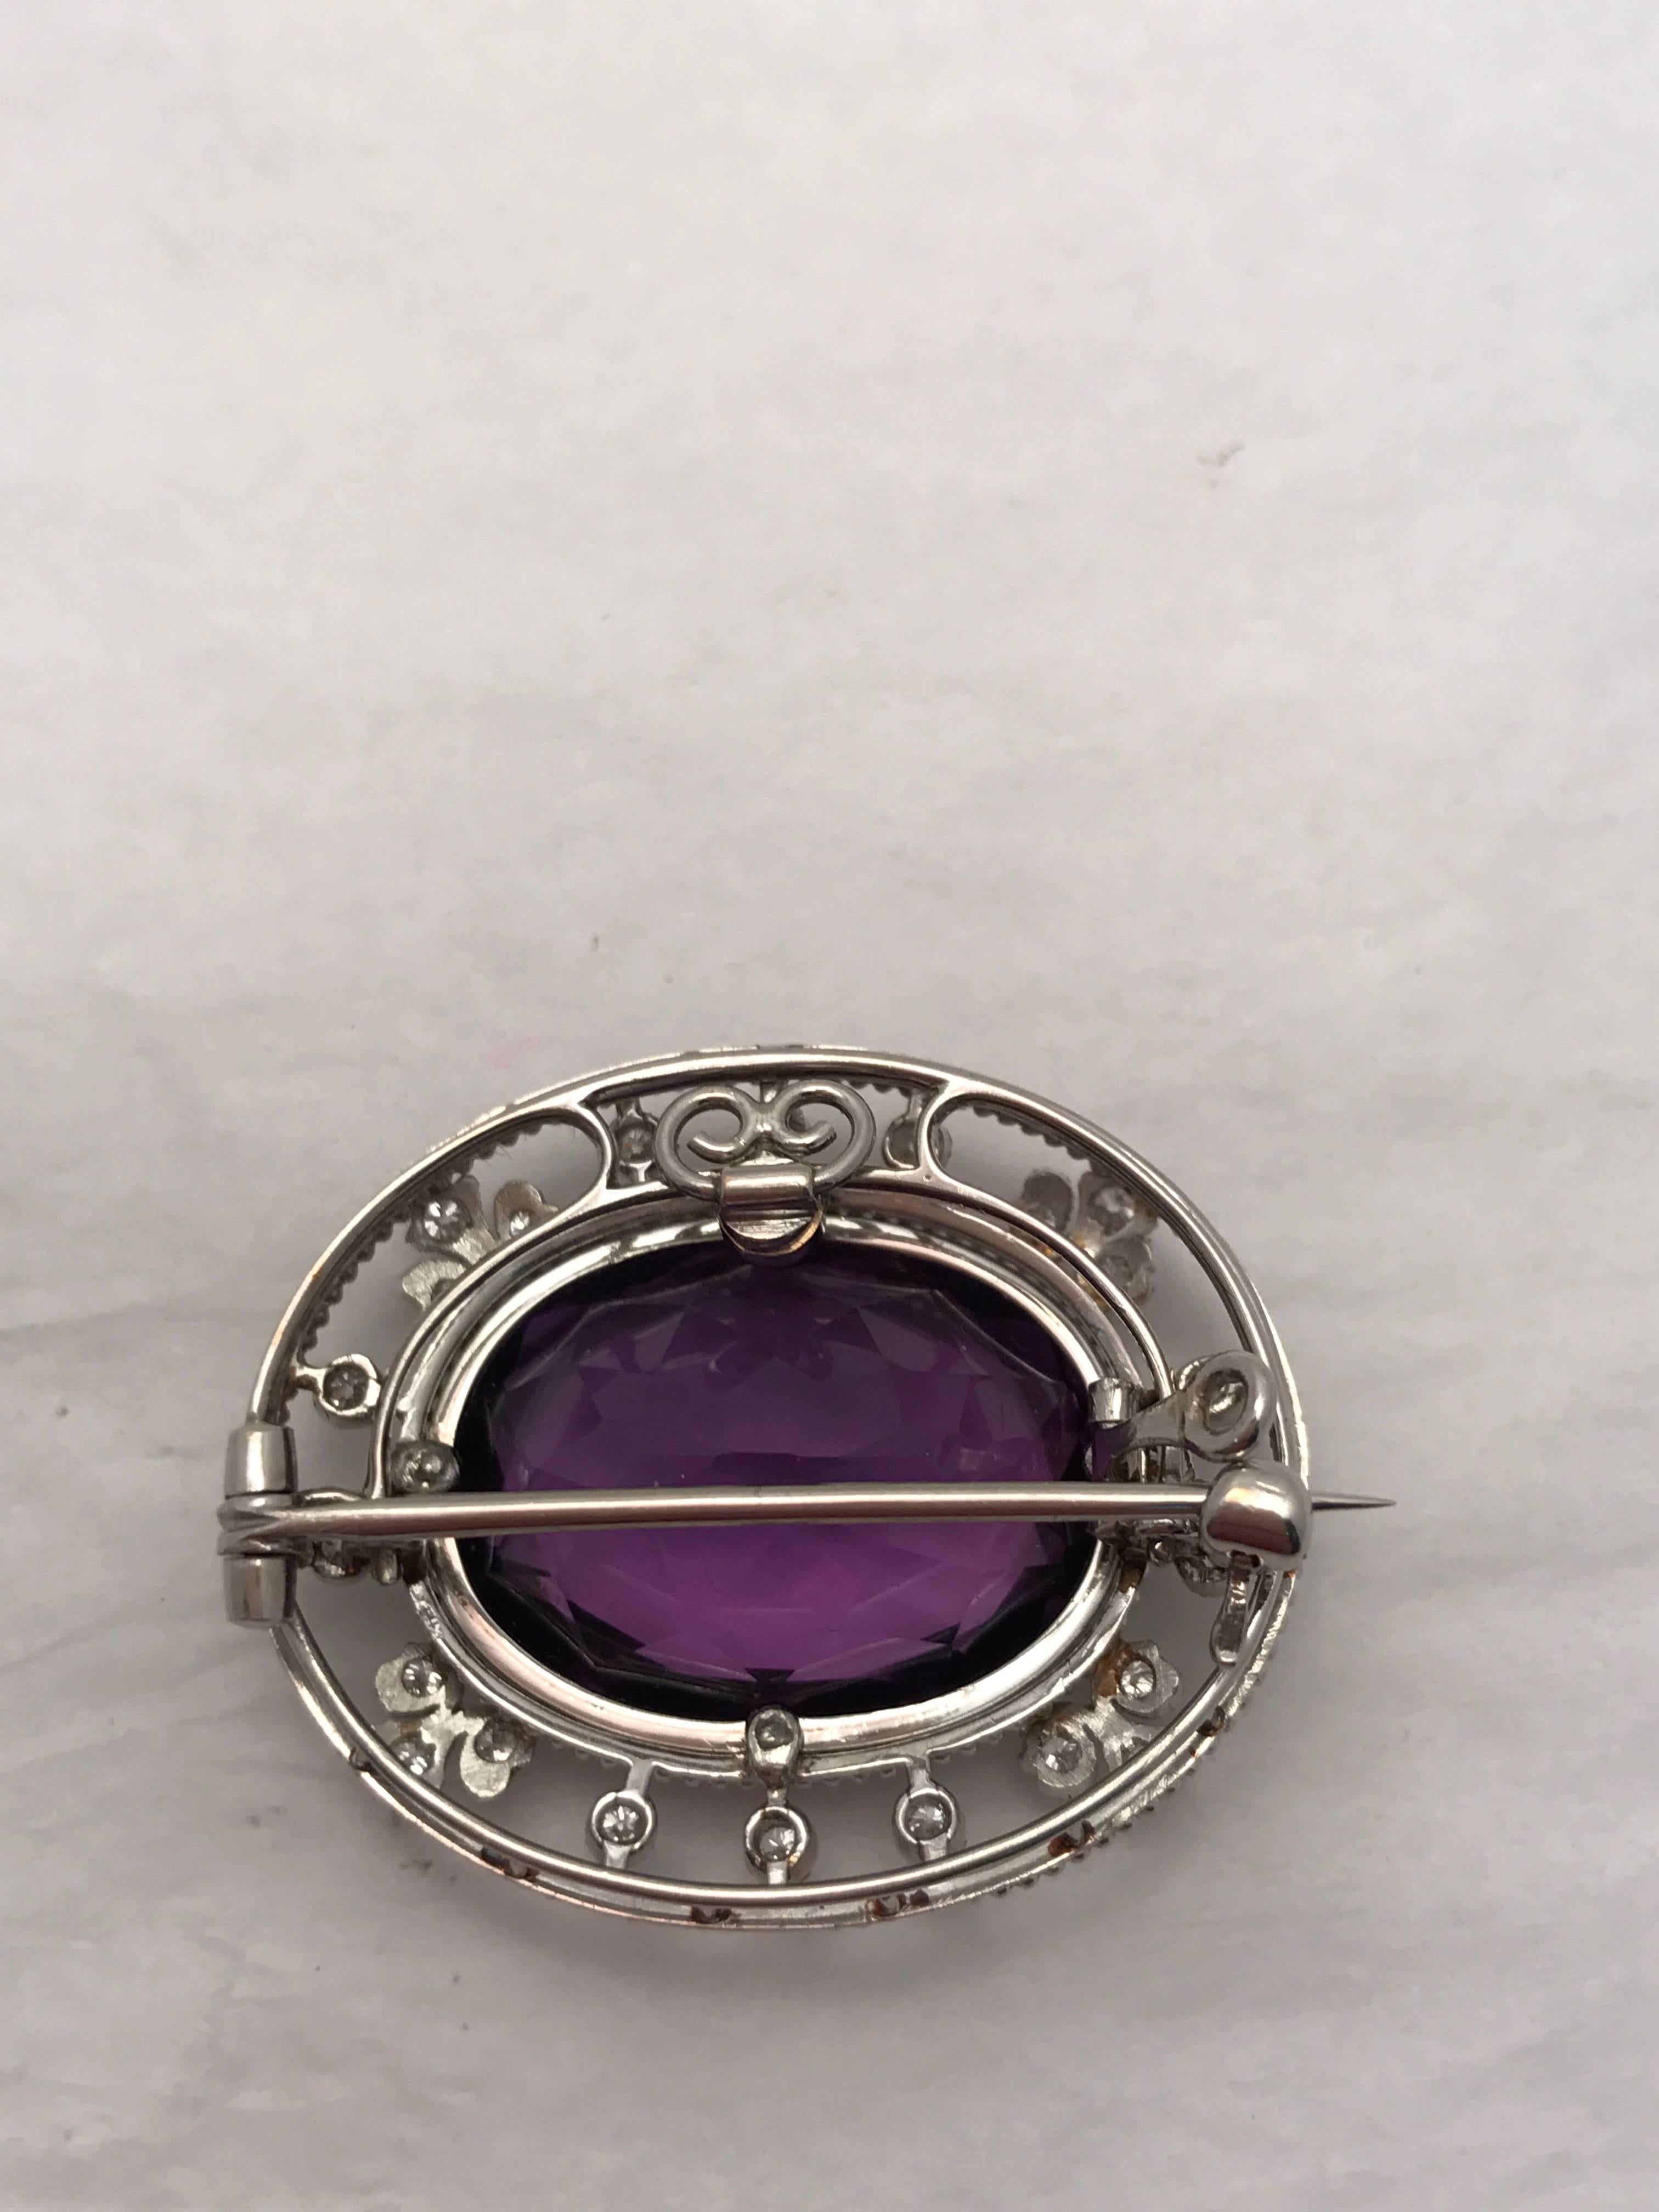 This 18 Kt. white gold pendant/brooch is set with one beautiful oval amethyst surrounded by full cut diamonds in a delicate motif.  Amethyst separates from the frame to become a bezel set pendant which hangs vertically.  